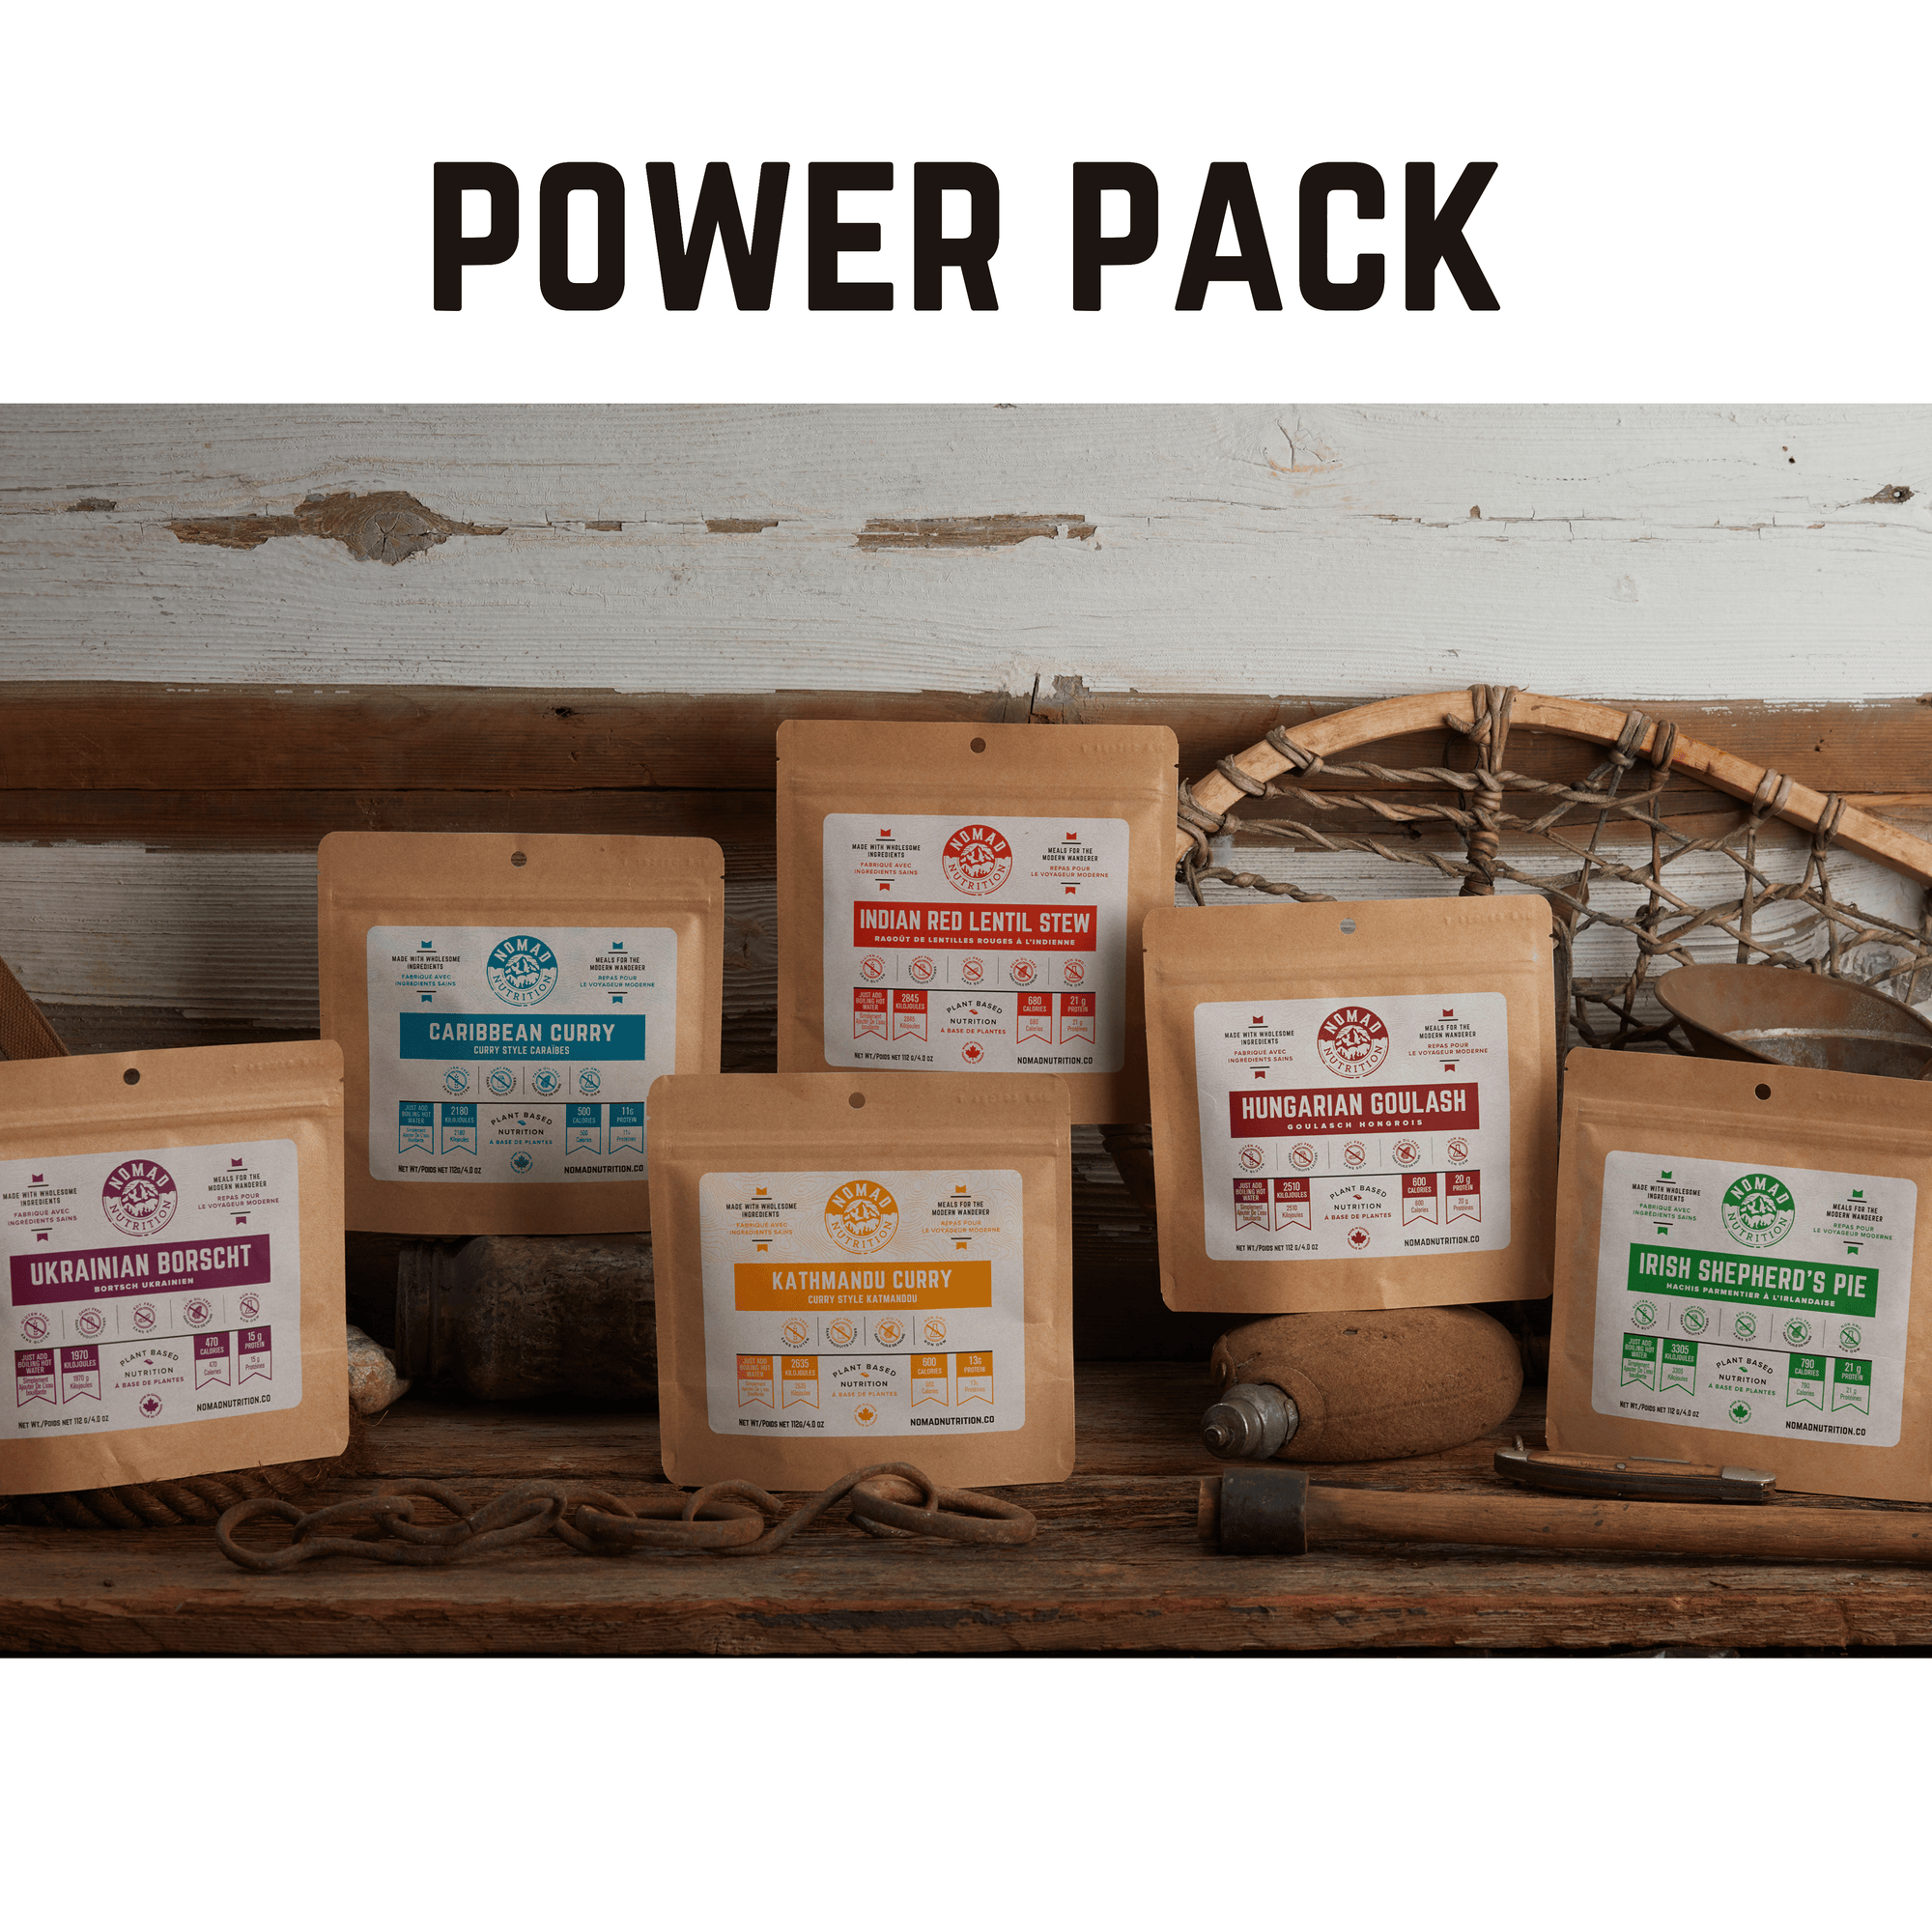 Nomad Nutrition Power Pack with 6 meal sizes 112g. From left: Ukrainian Borscht, Caribbean Curry, Kathmandu Curry, Indian Red Lentil Stew, Hungarian Goulash, Irish Shepherd's Pie.